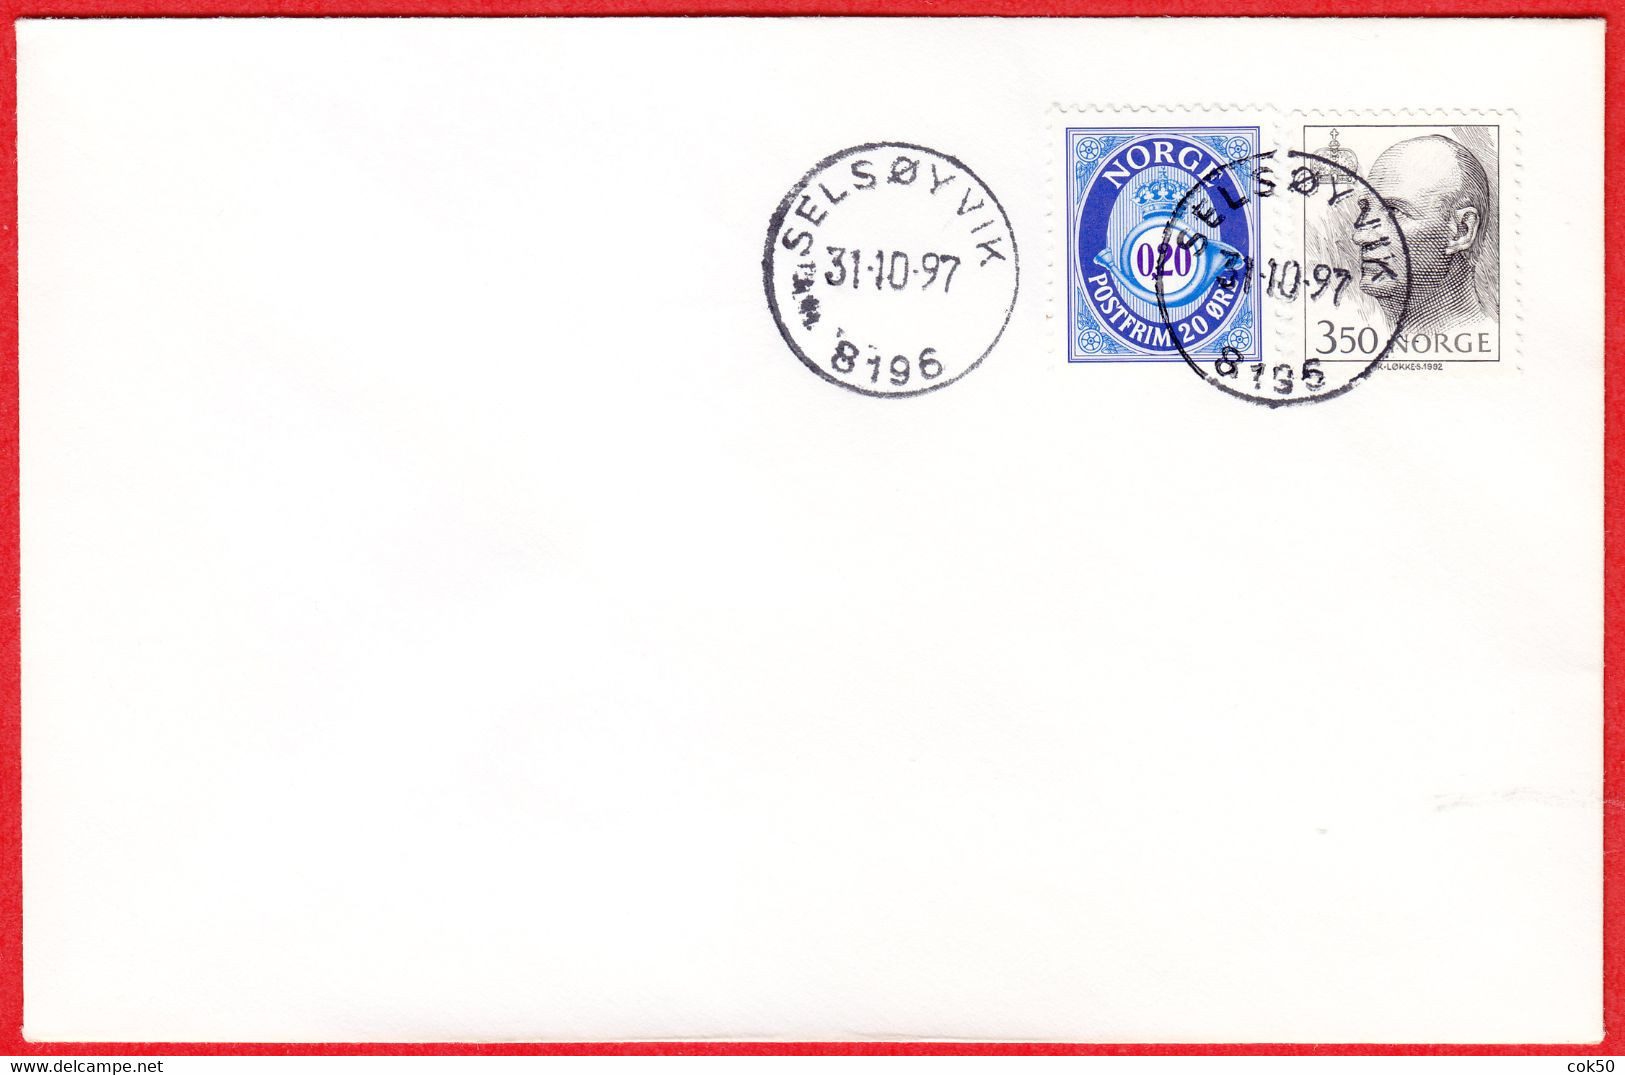 NORWAY -  8196 SELSØYVIK (Nordland County) - Last Day/postoffice Closed On 1997.10.31 - Local Post Stamps